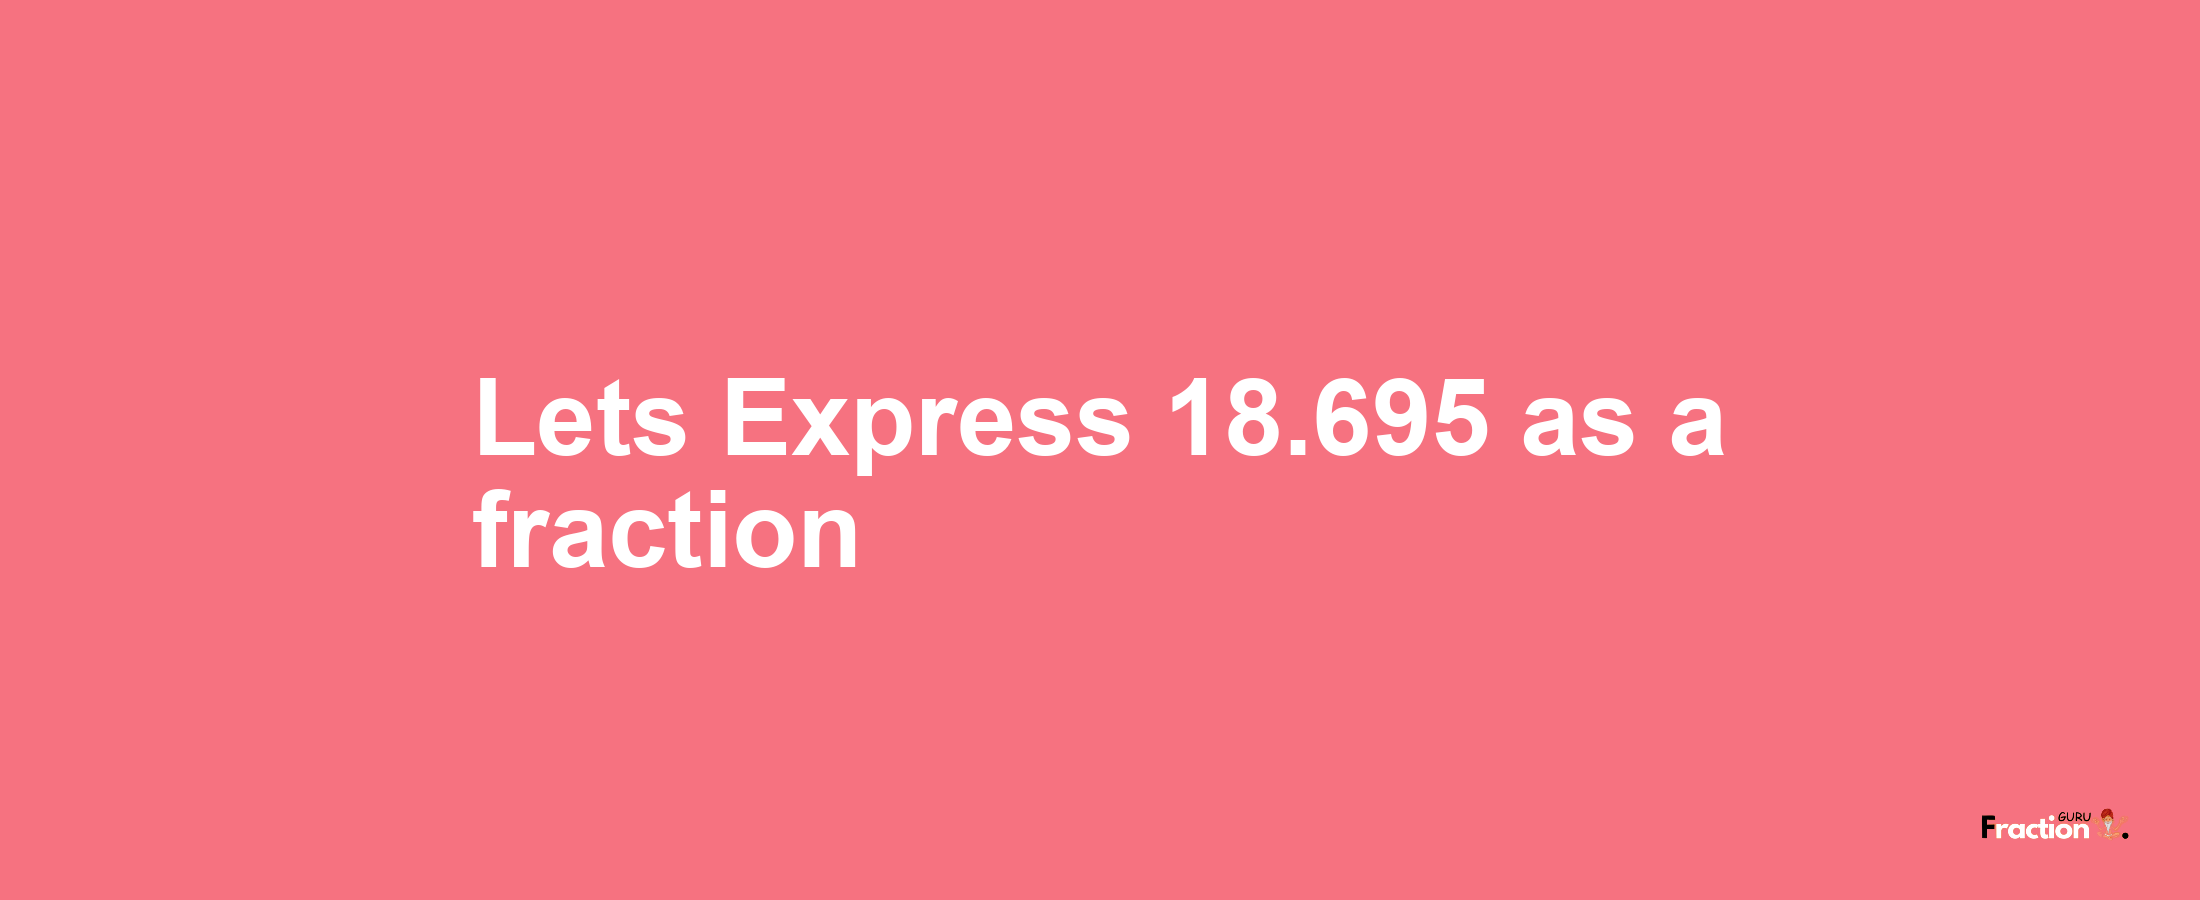 Lets Express 18.695 as afraction